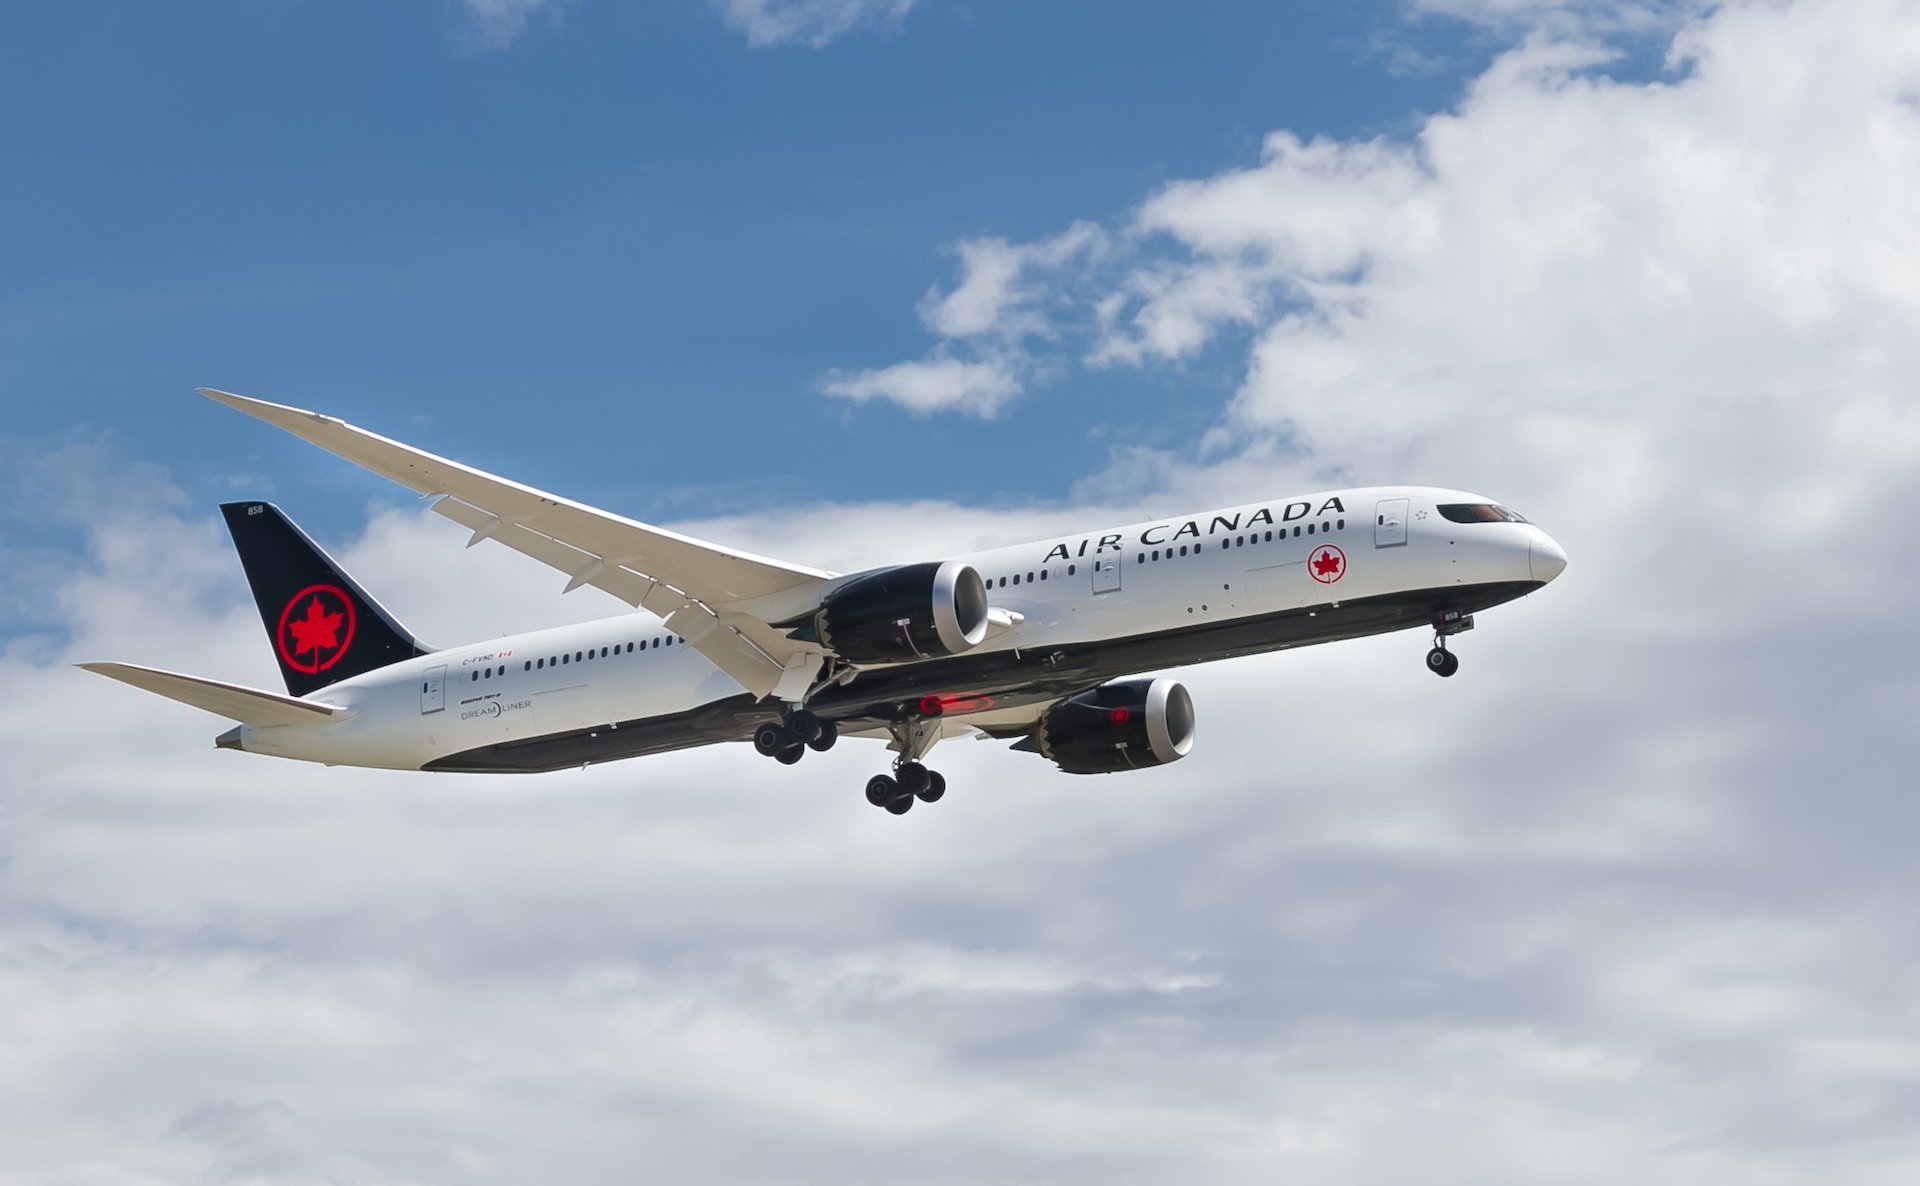 Air Canada discloses data breach of employee and 'certain records'